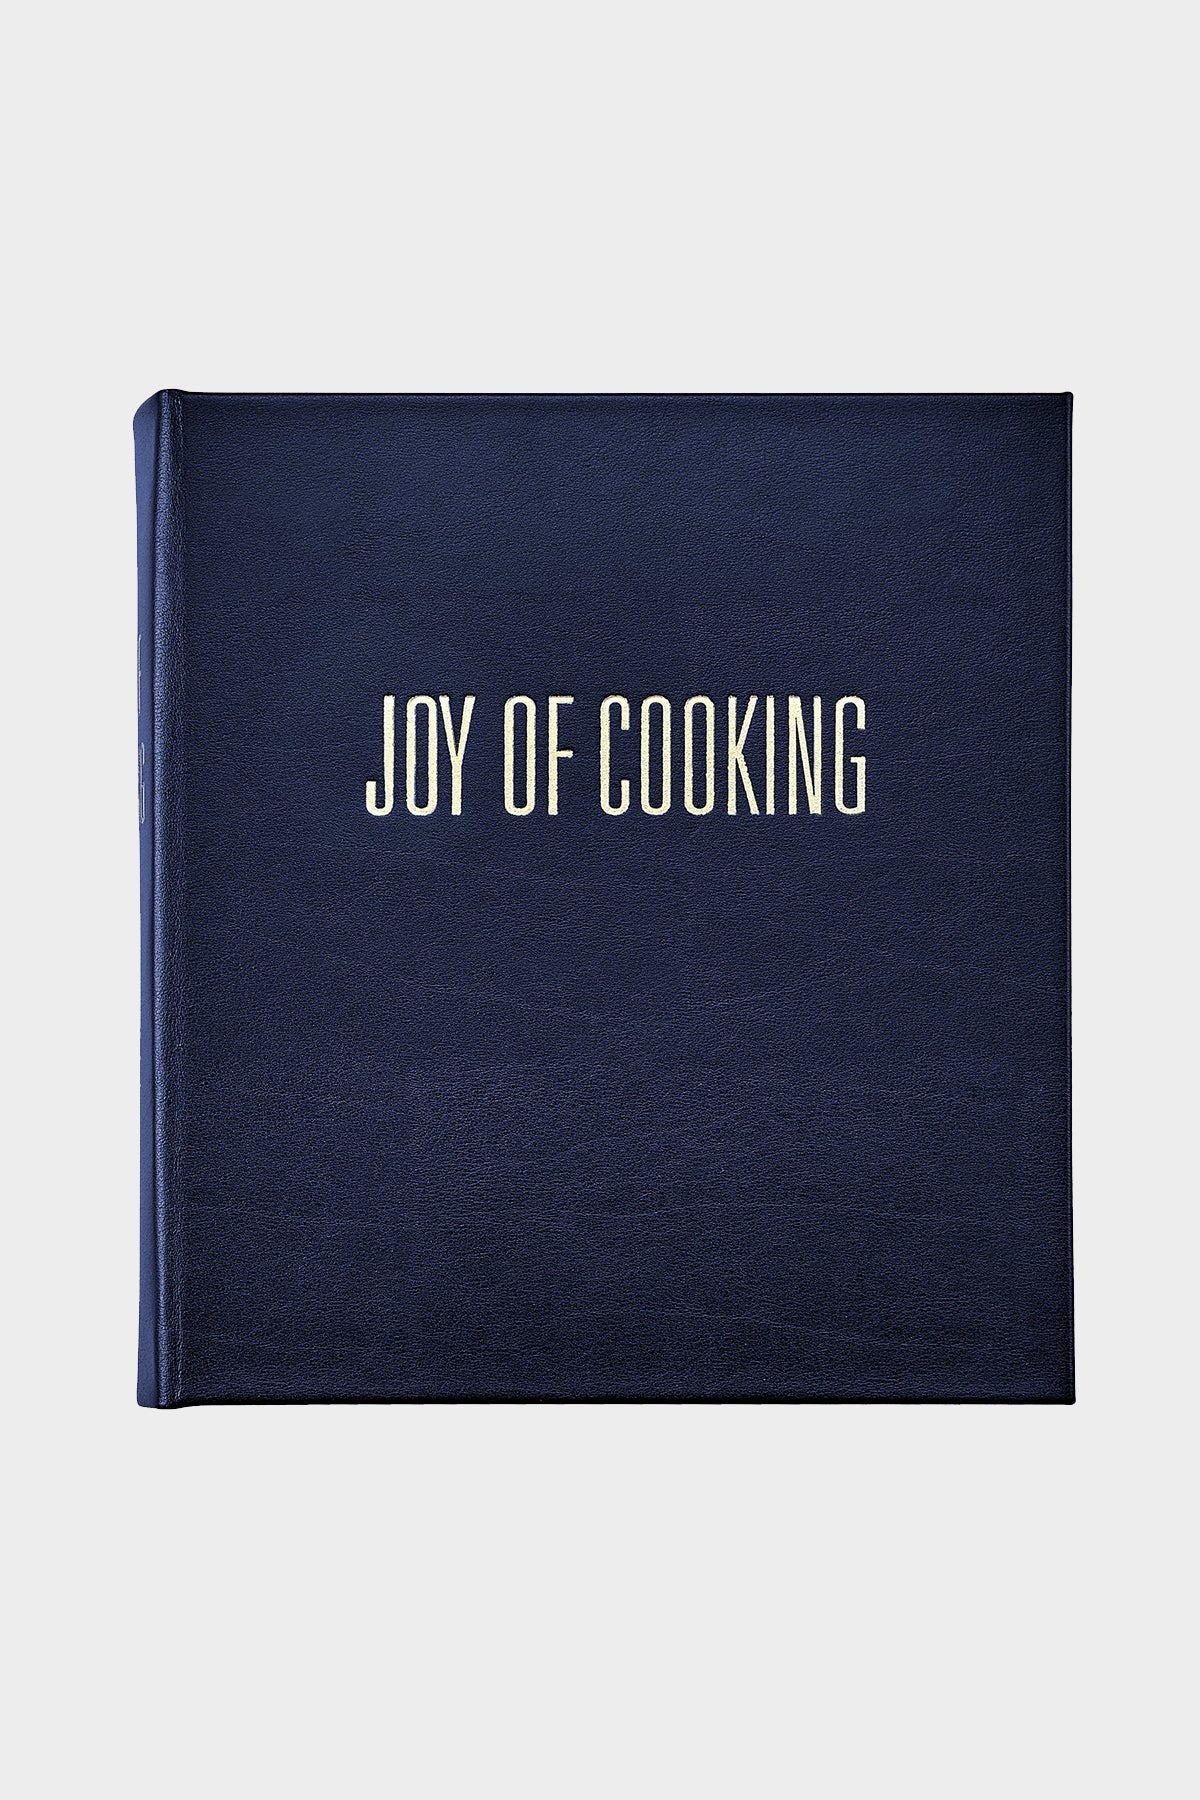 Joy of Cooking in Navy Bonded Leather - shop-olivia.com